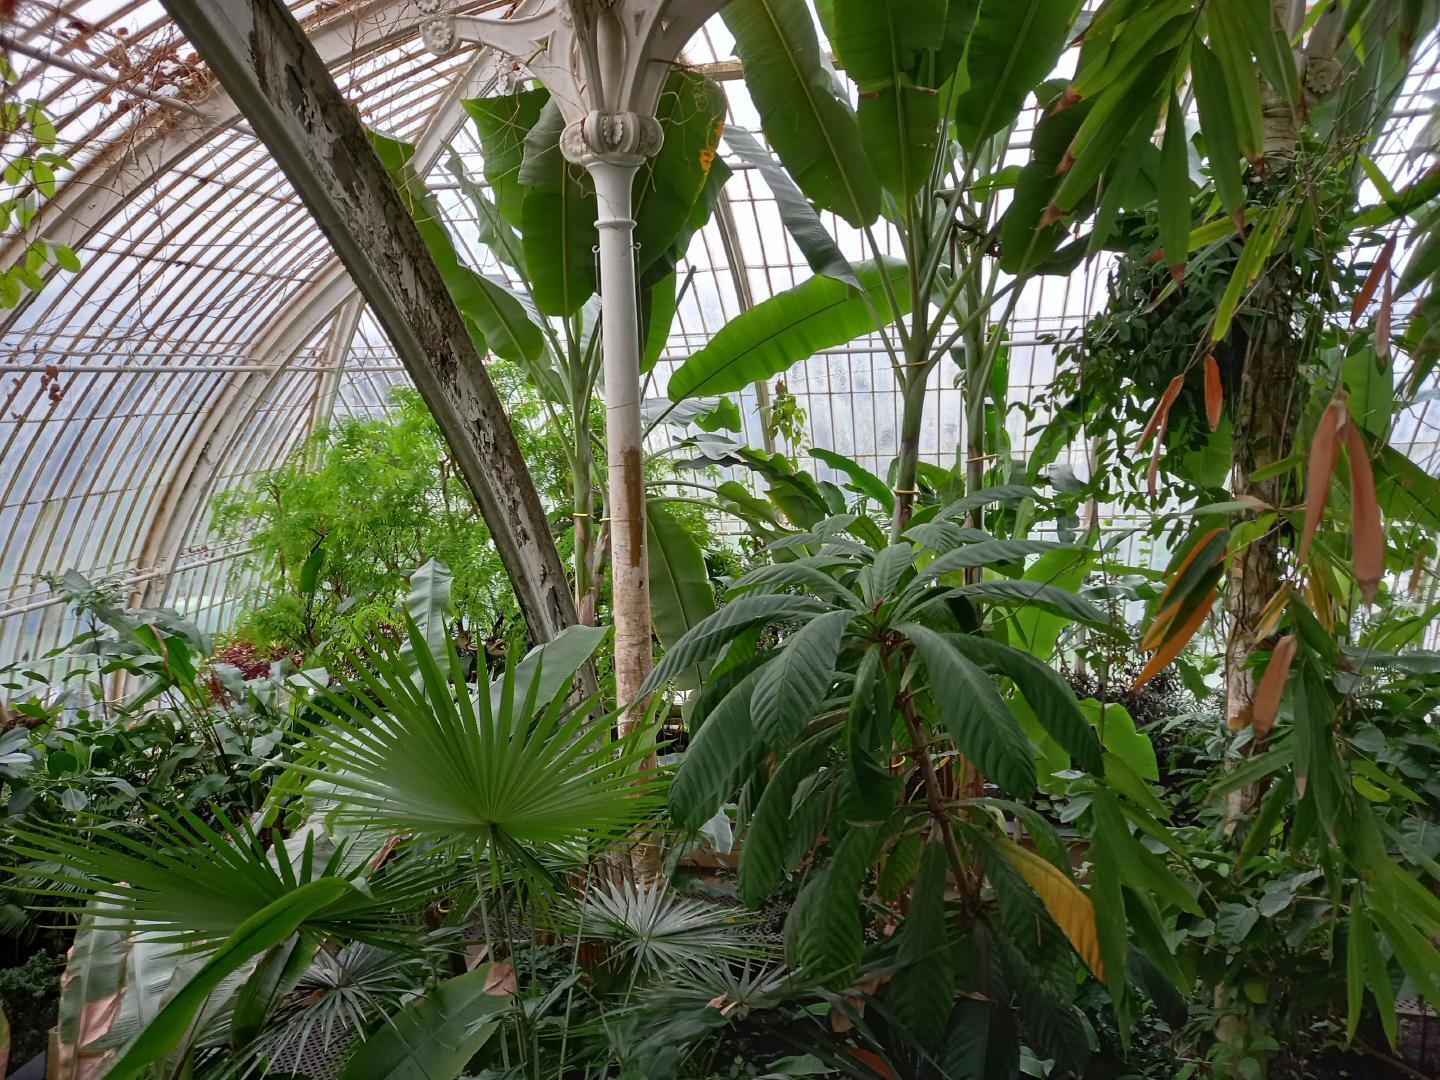 Higher level view inside Palm House